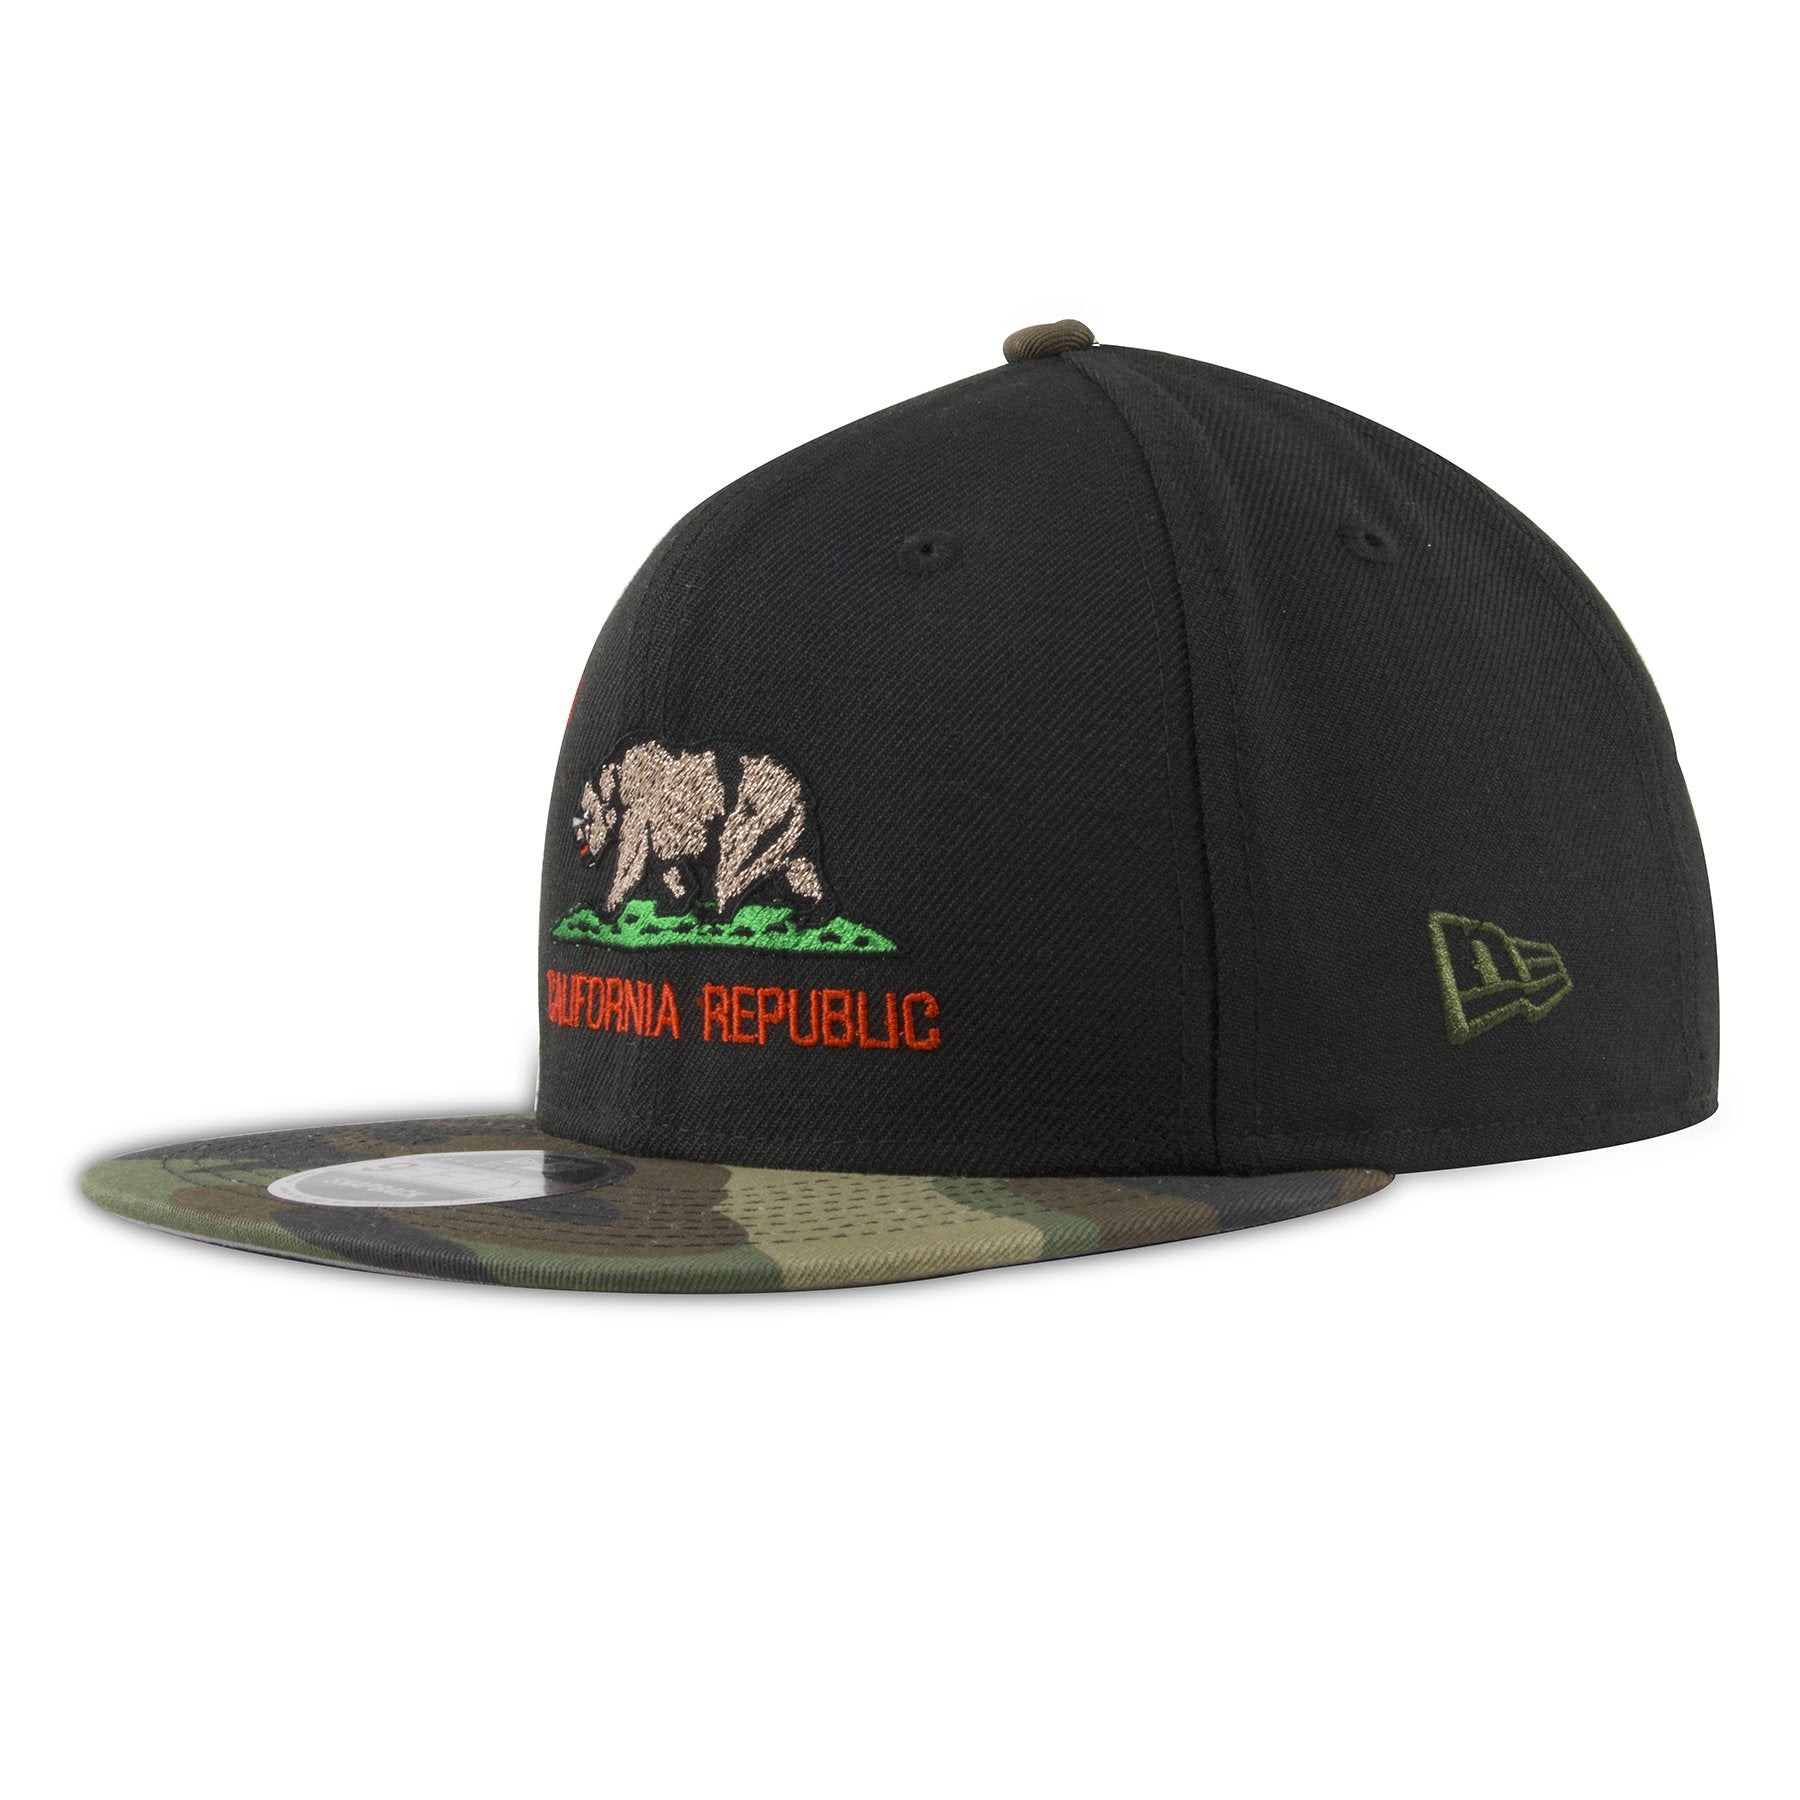 On the left side of the California Republic snapback hat is the New Era logo embroidered in military green